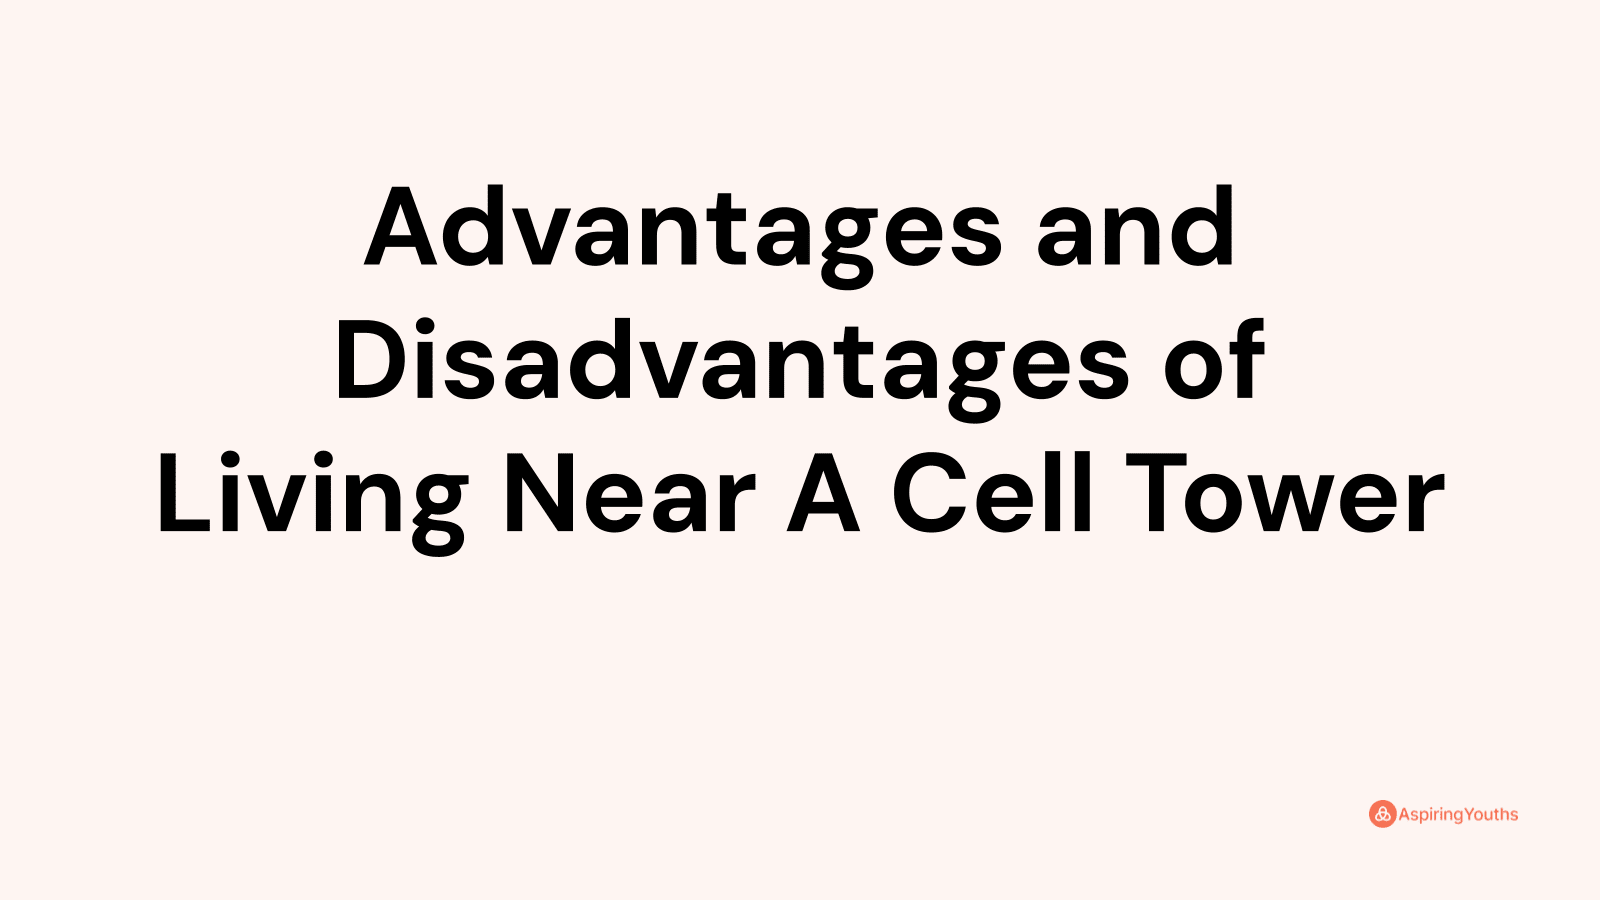 Advantages and disadvantages of Living Near A Cell Tower